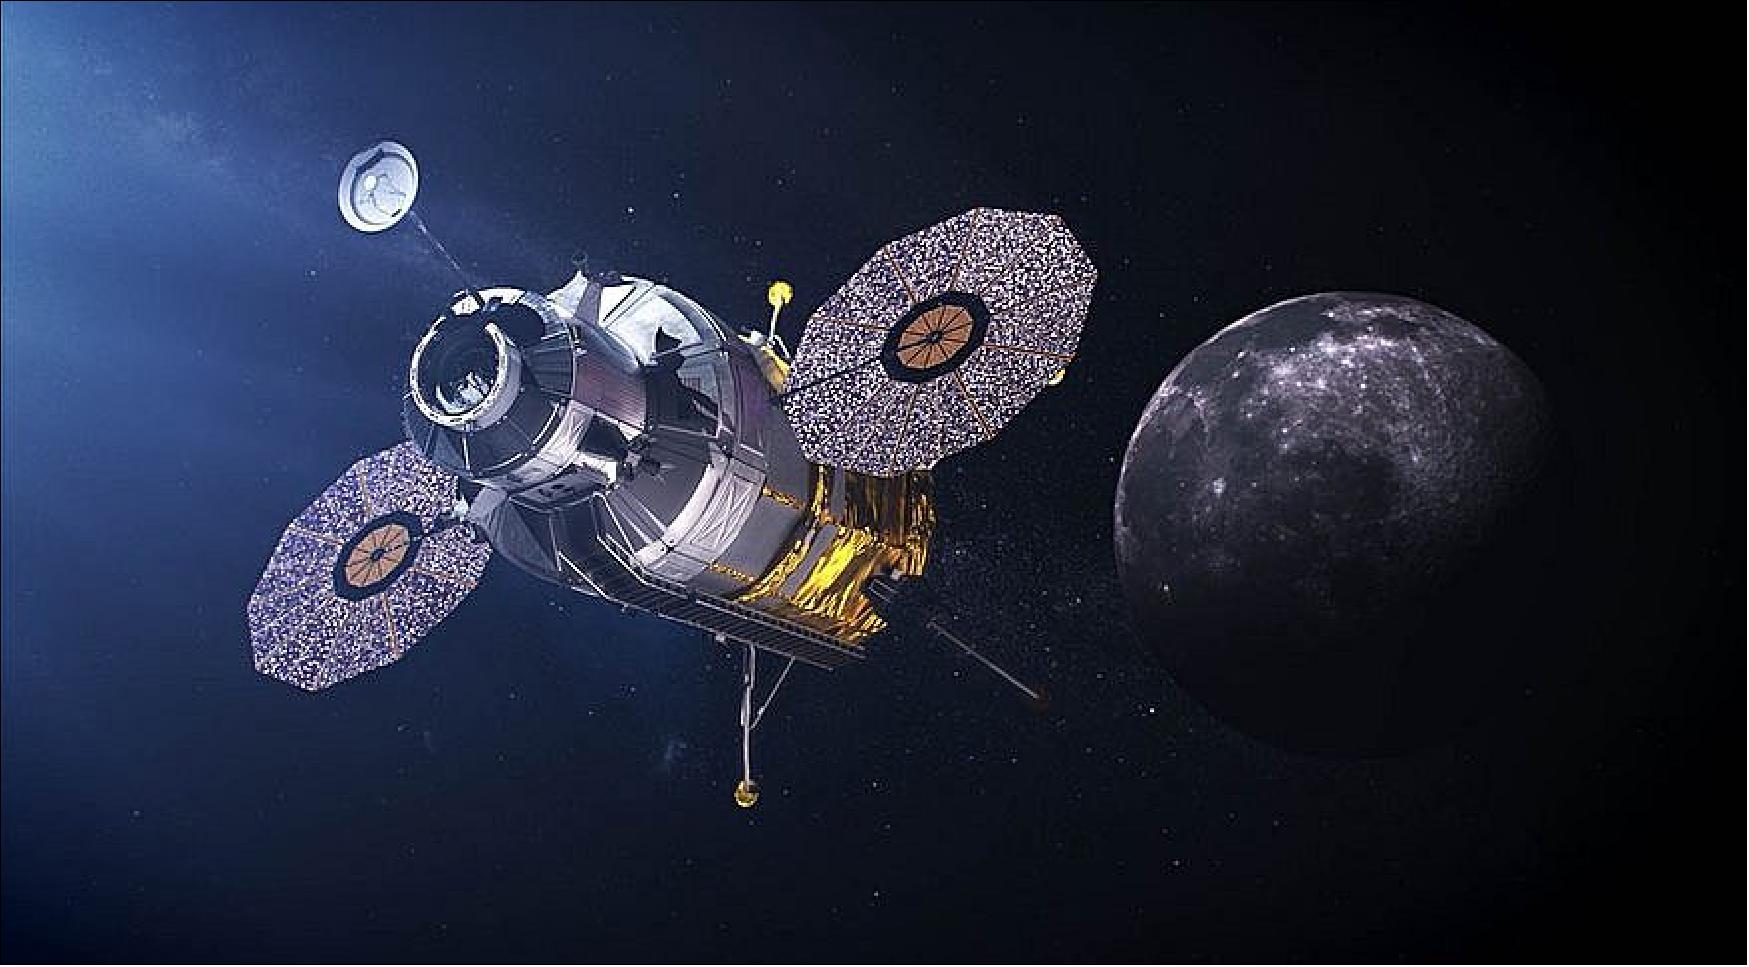 Figure 6: Rather than direct NASA to select a second Human Landing System provider, as one amendment proposed, the report accompanying the spending bill simply "urges NASA to bolster competition in lander development and production." (image credit: NASA)